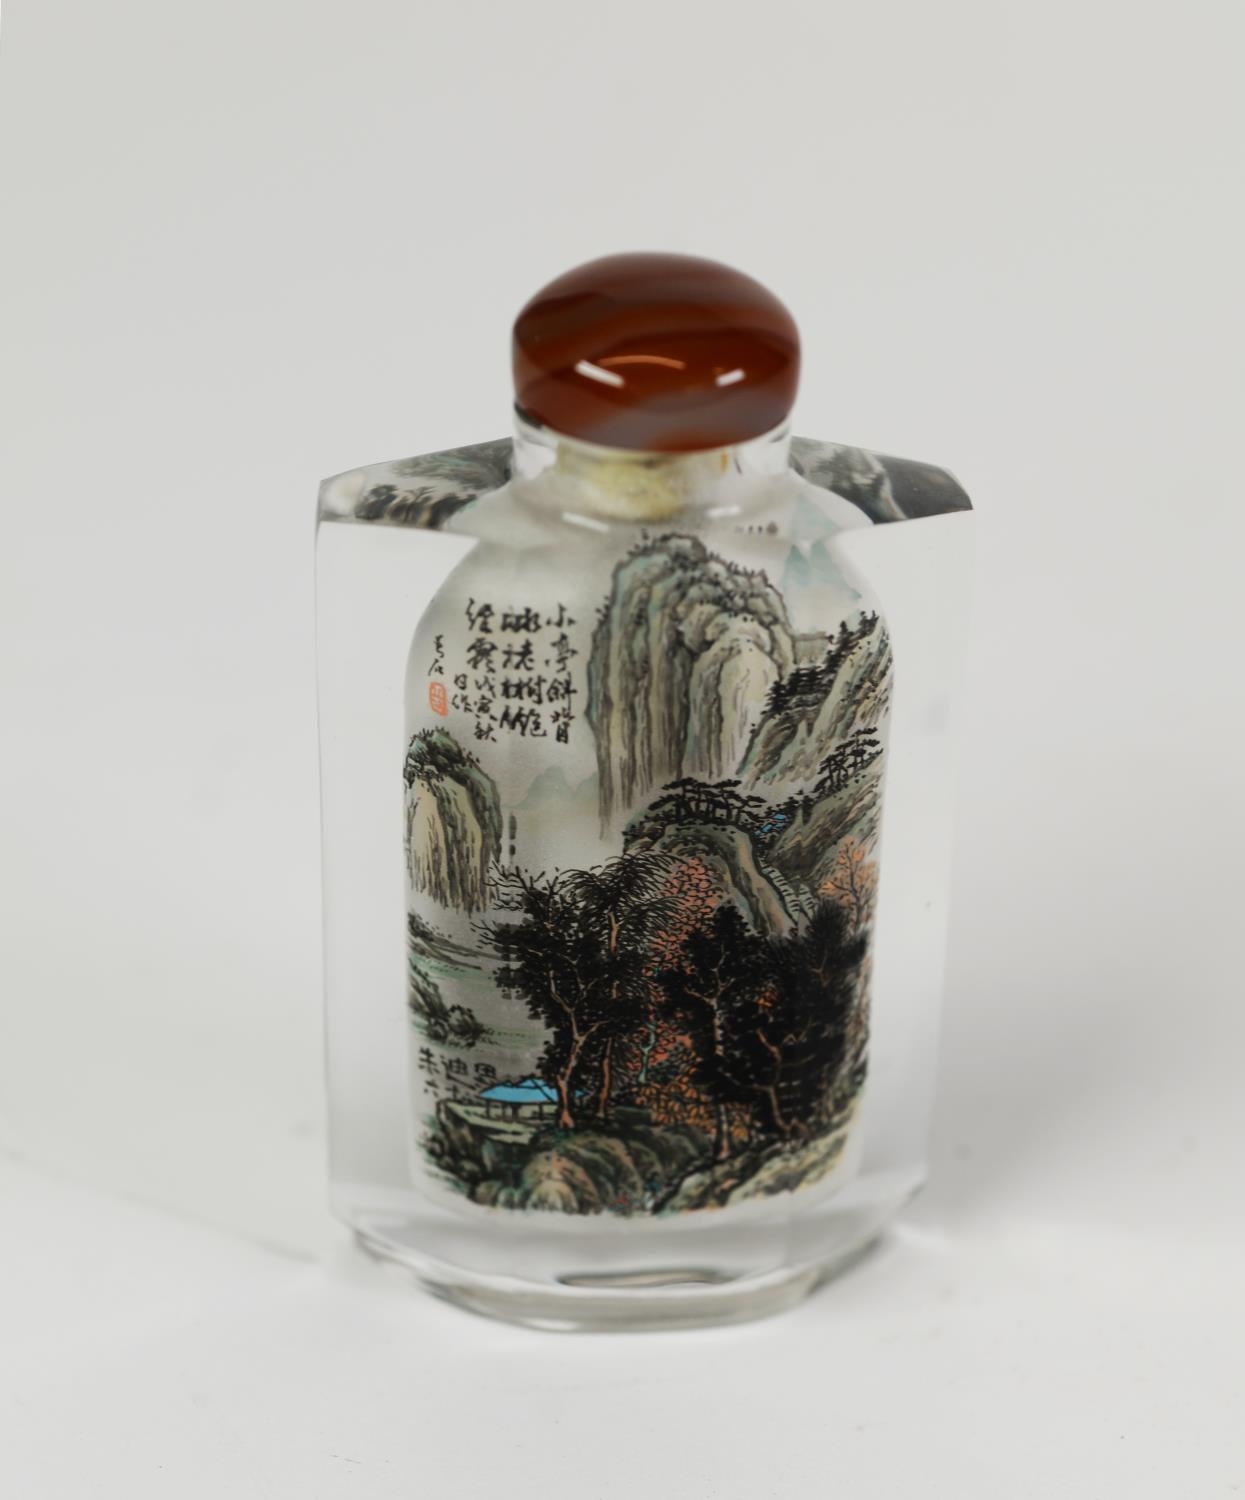 FINE QUALITY MODERN CHINESE INTERNALLY PAINTED SNUFF BOTTLE encased in facet cut clear glass with - Image 2 of 3